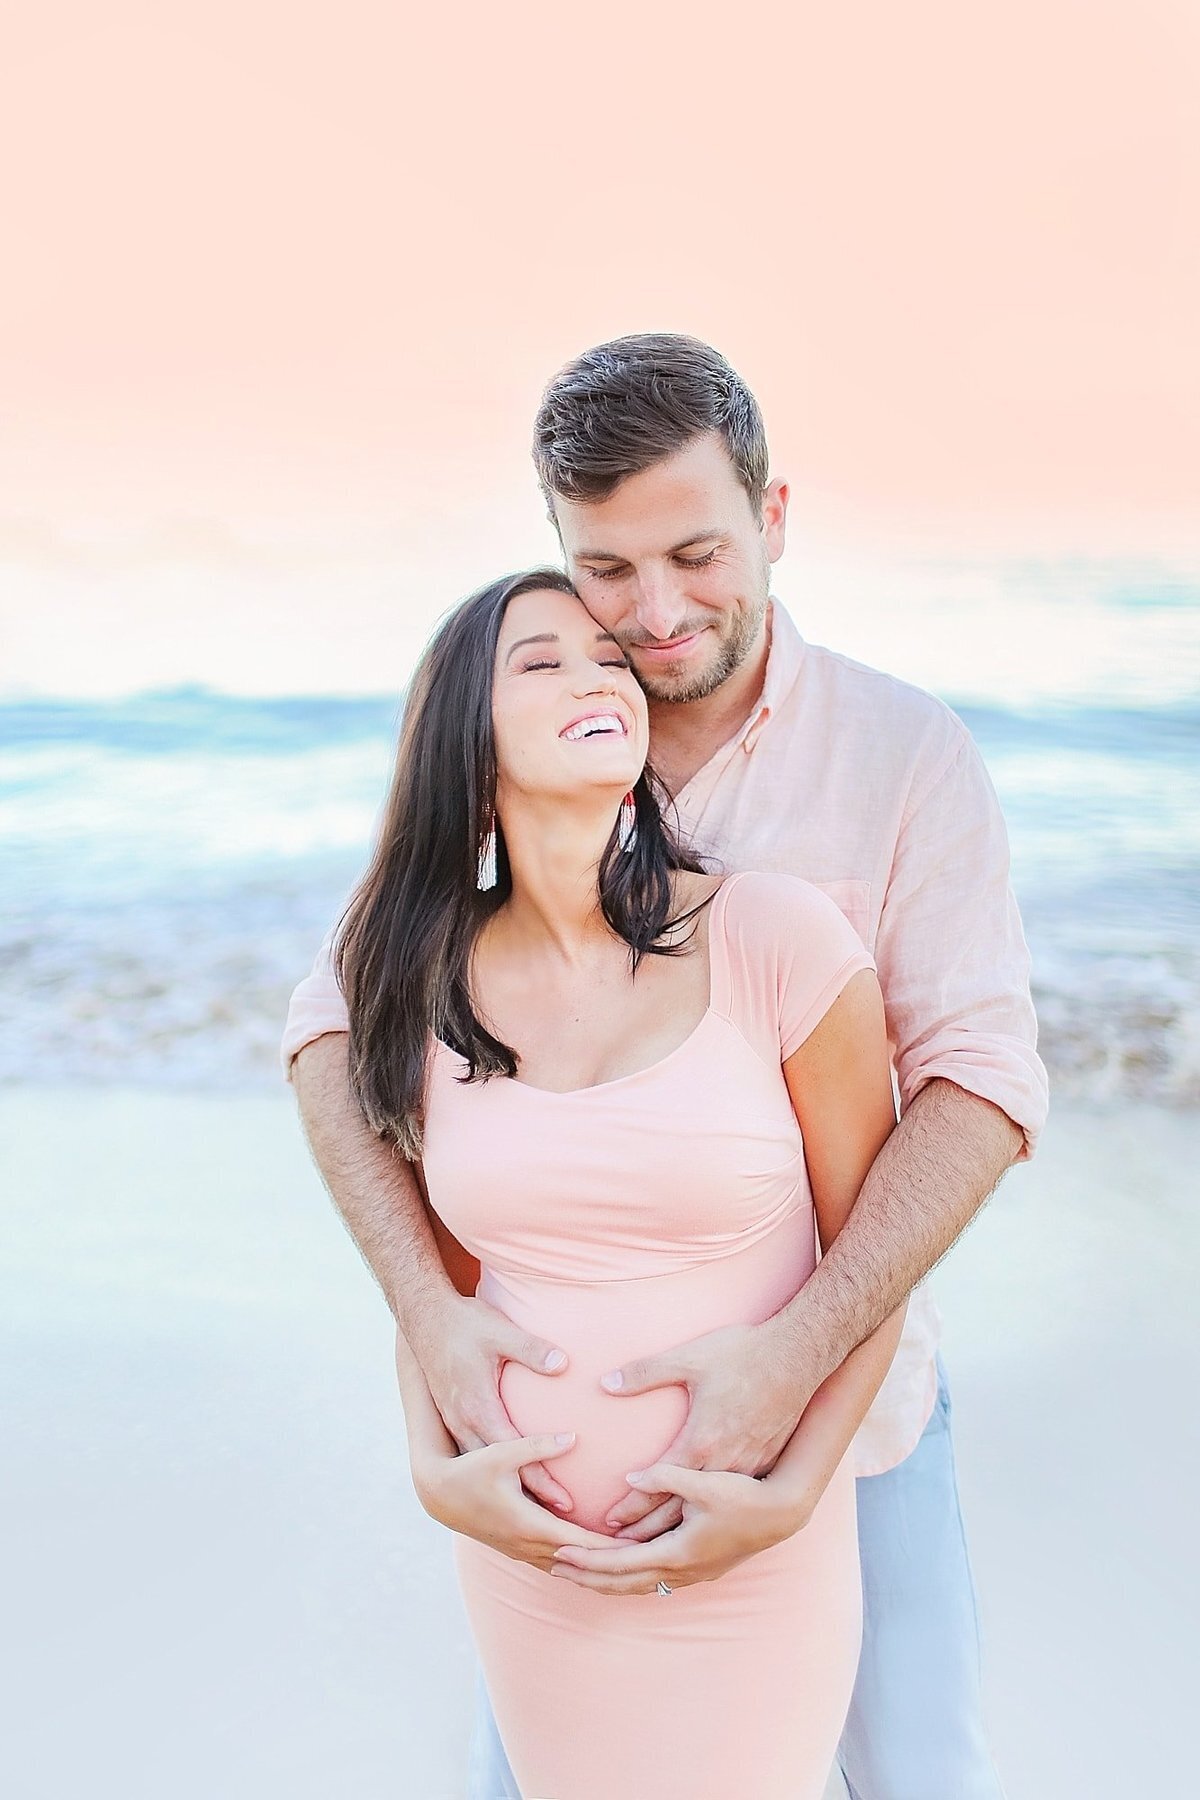 Jade and Tanner maternity portraits photographed by Love + Water on the island of Maui